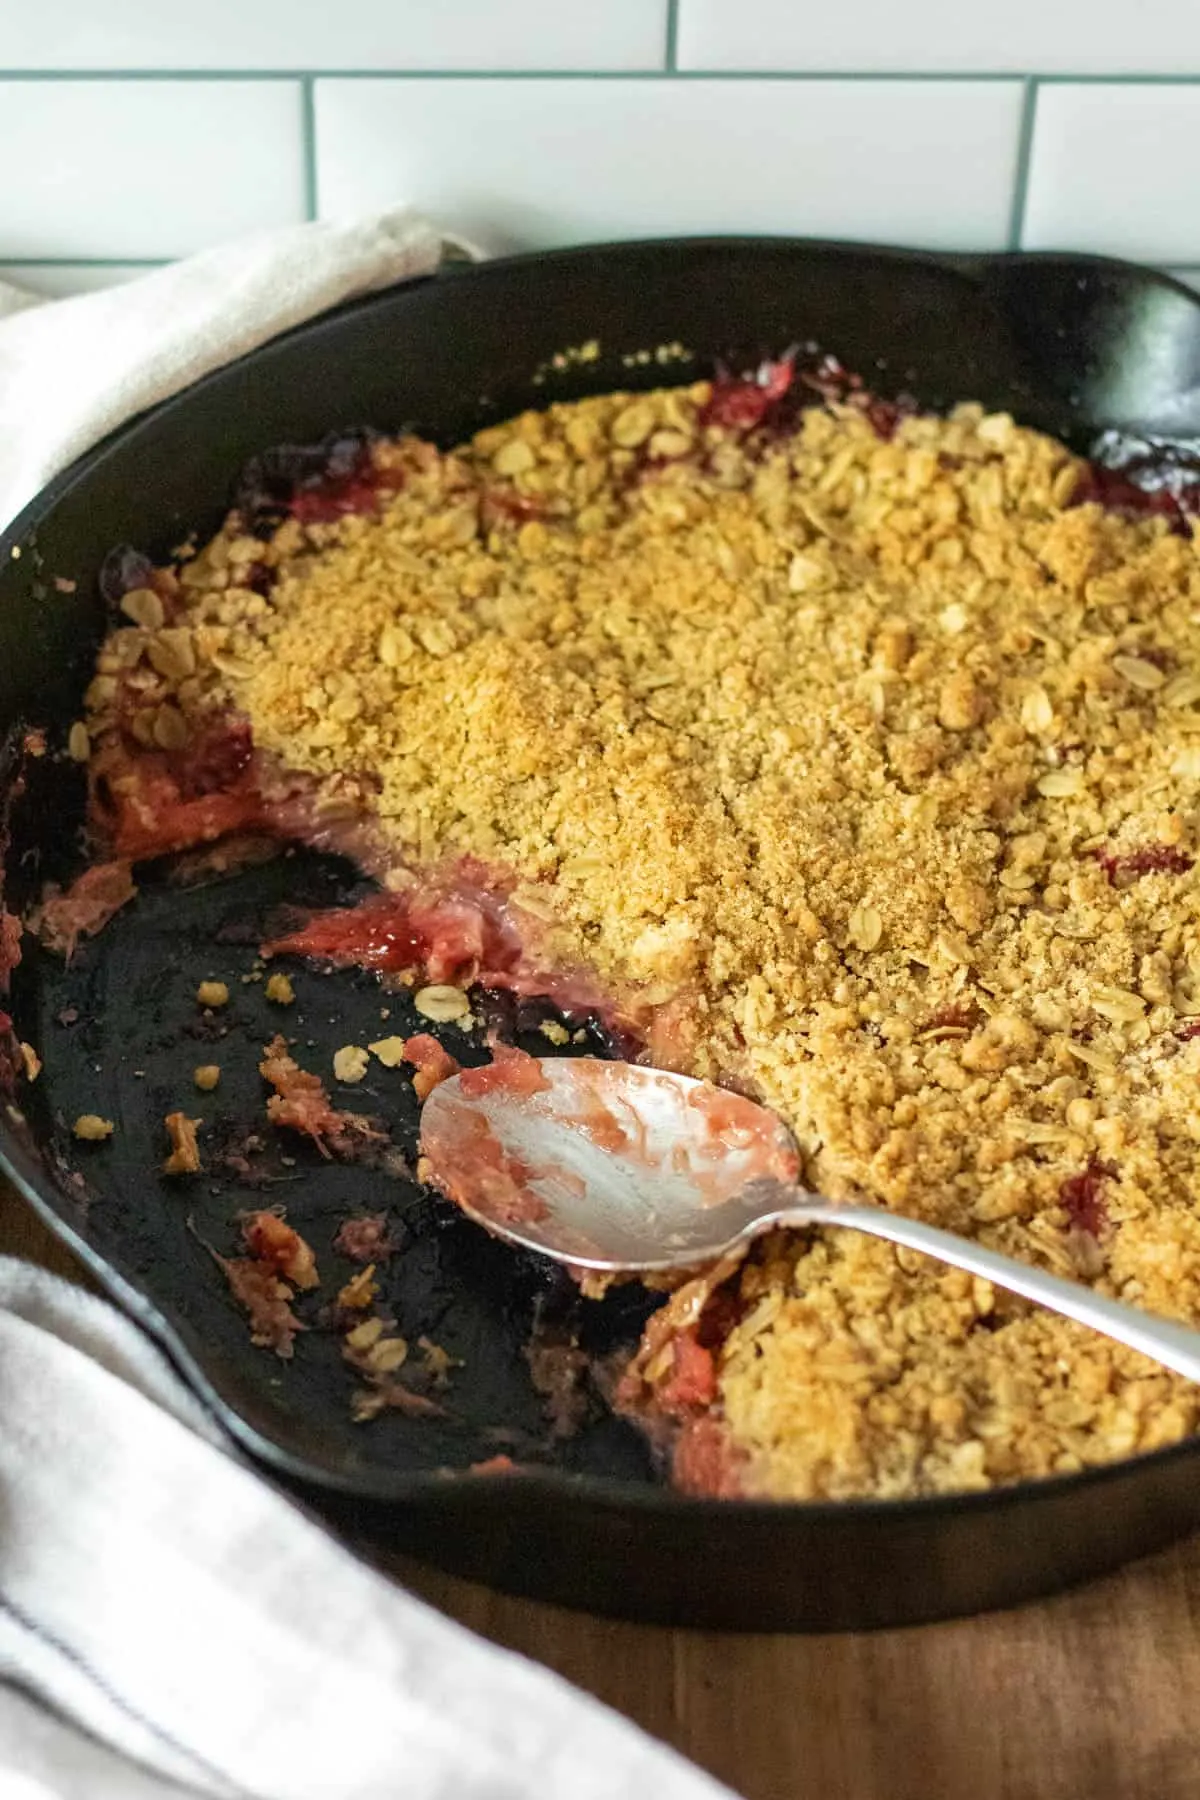 Strawberry rhubarb crisp in cast iron skillet, with serving spoon showing layers of crisp.